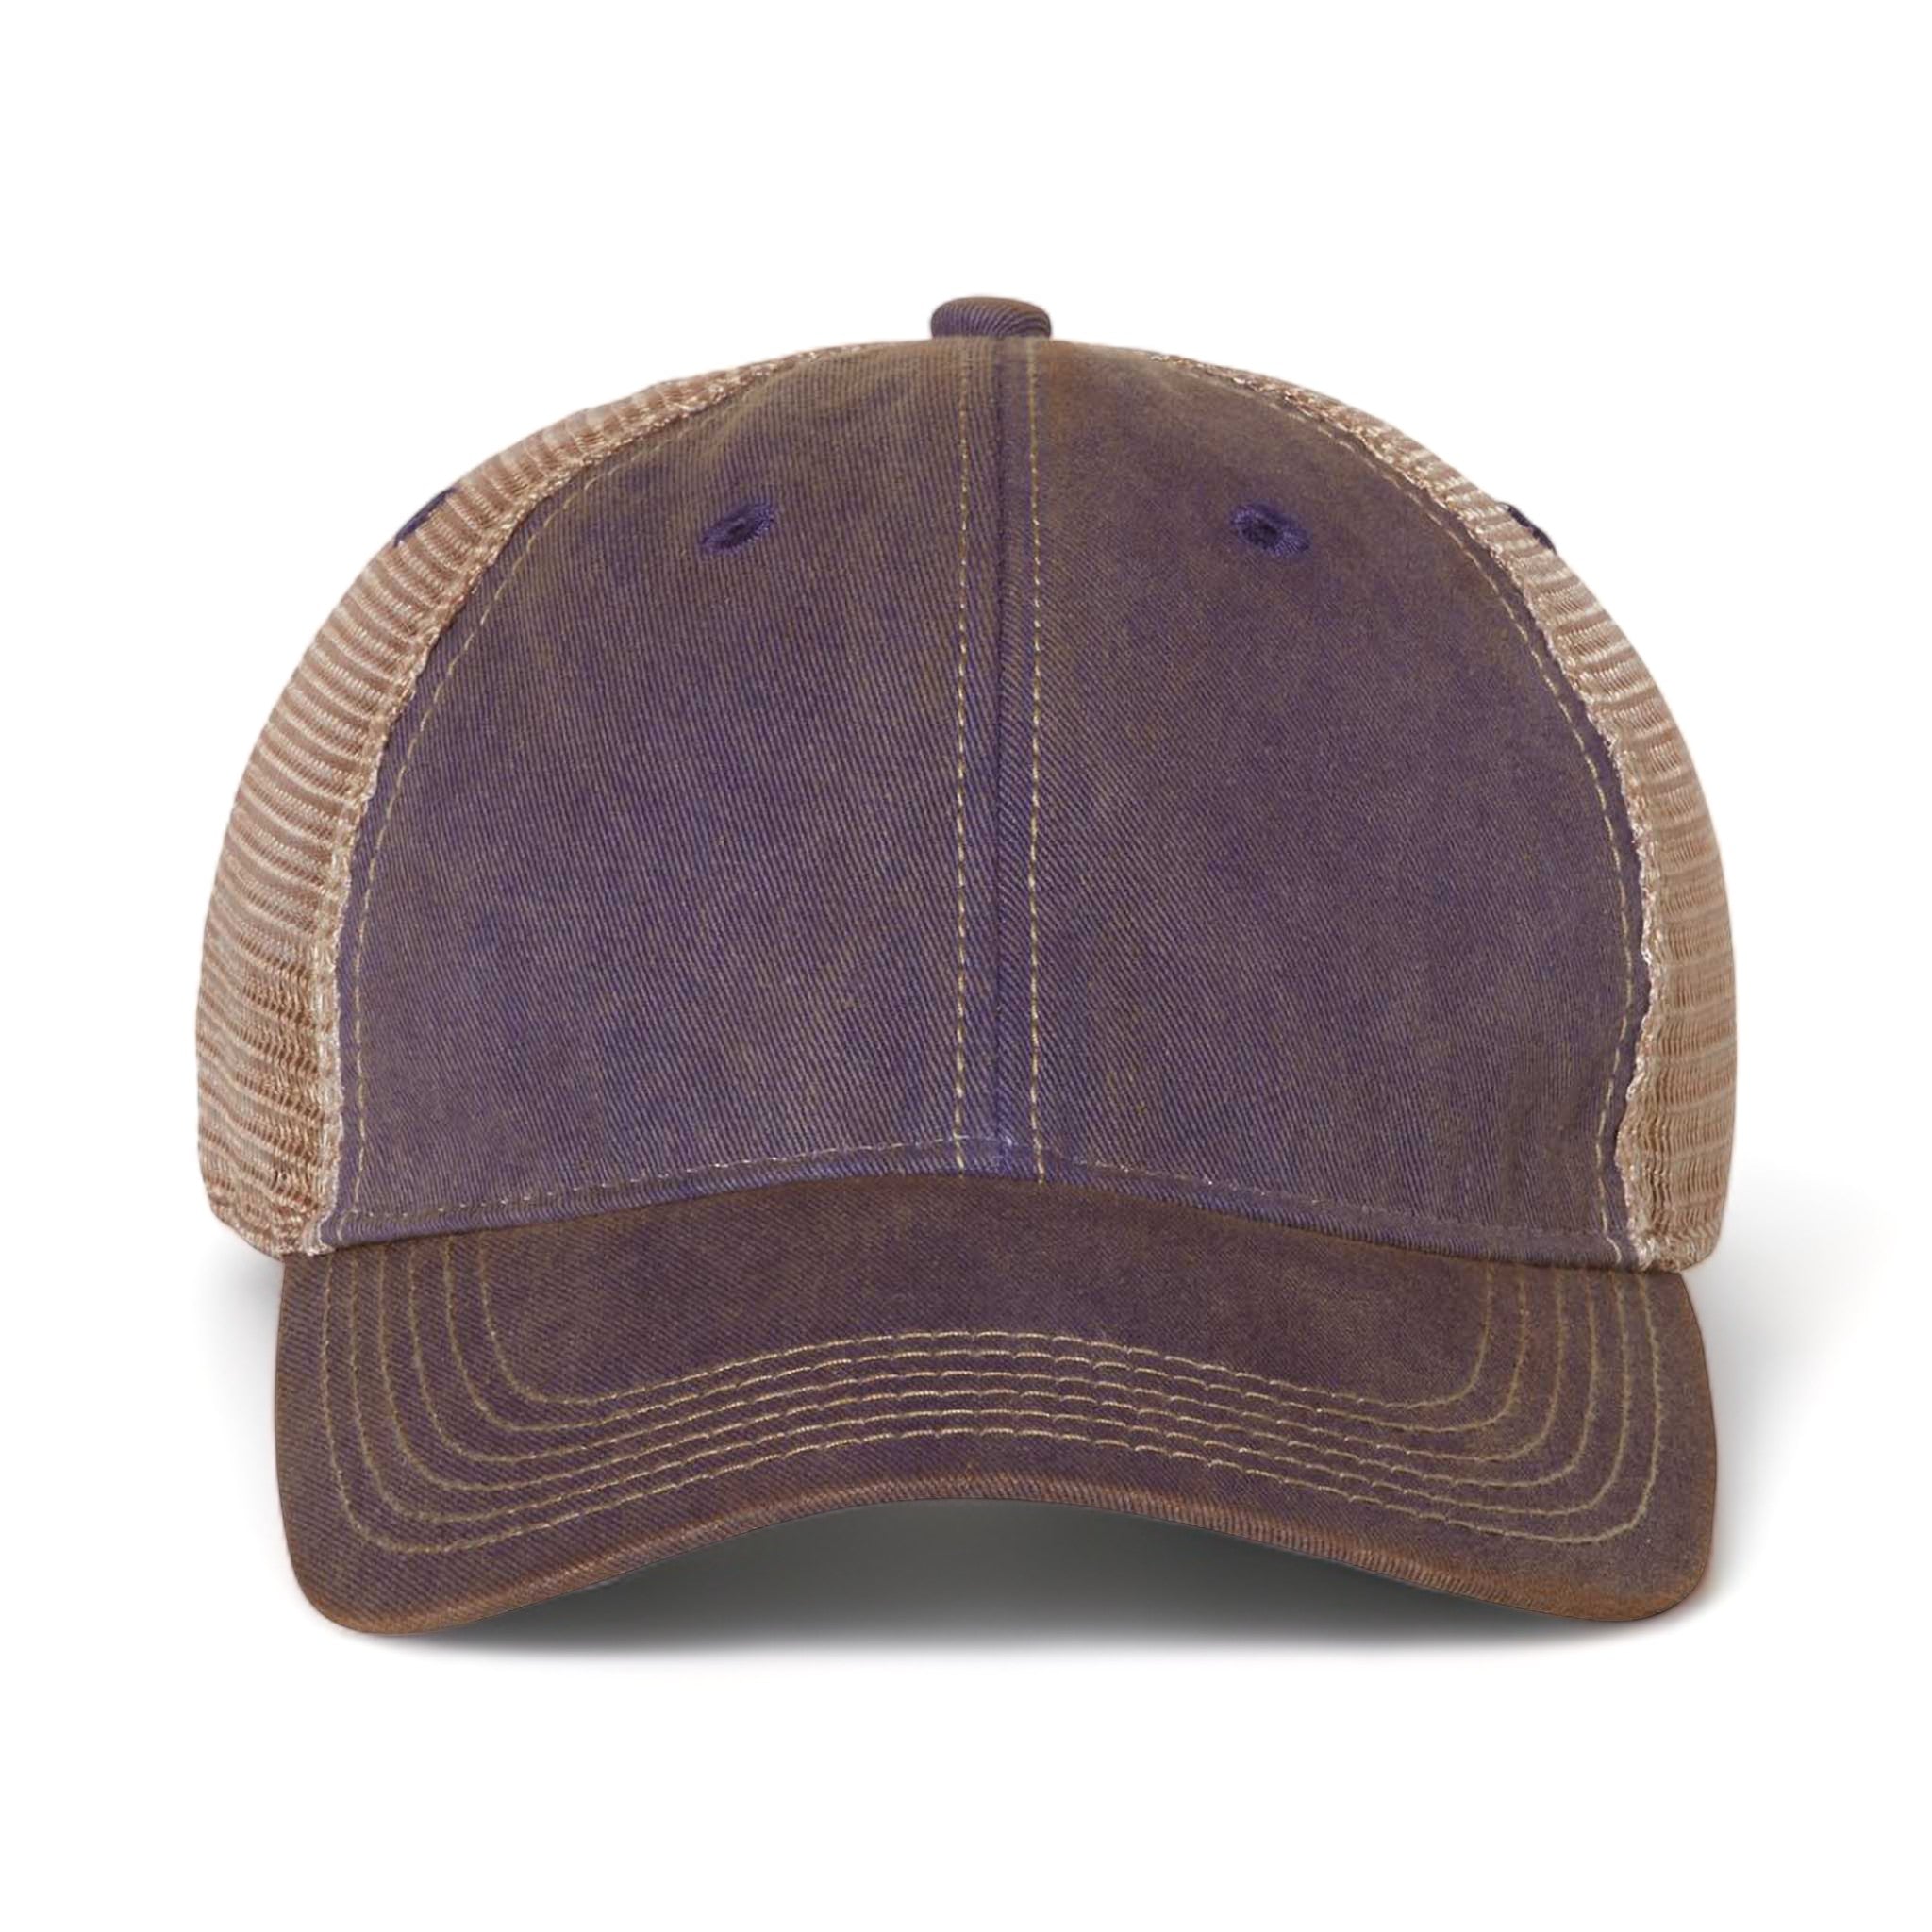 Front view of LEGACY OFA custom hat in purple and khaki